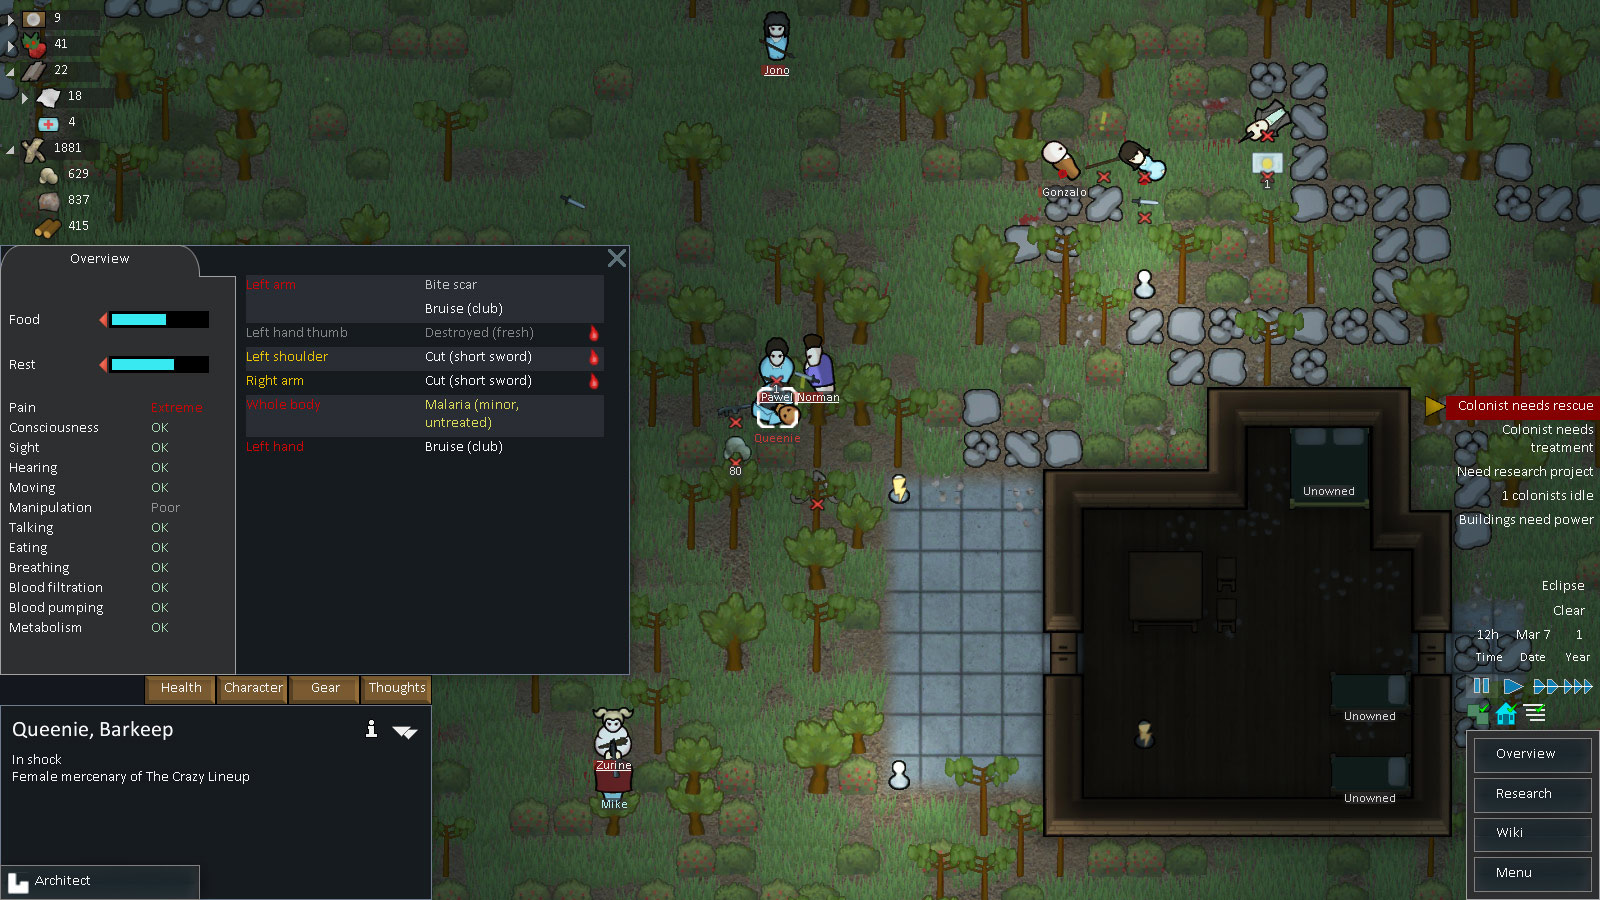 Tips For Getting Started In RimWorld